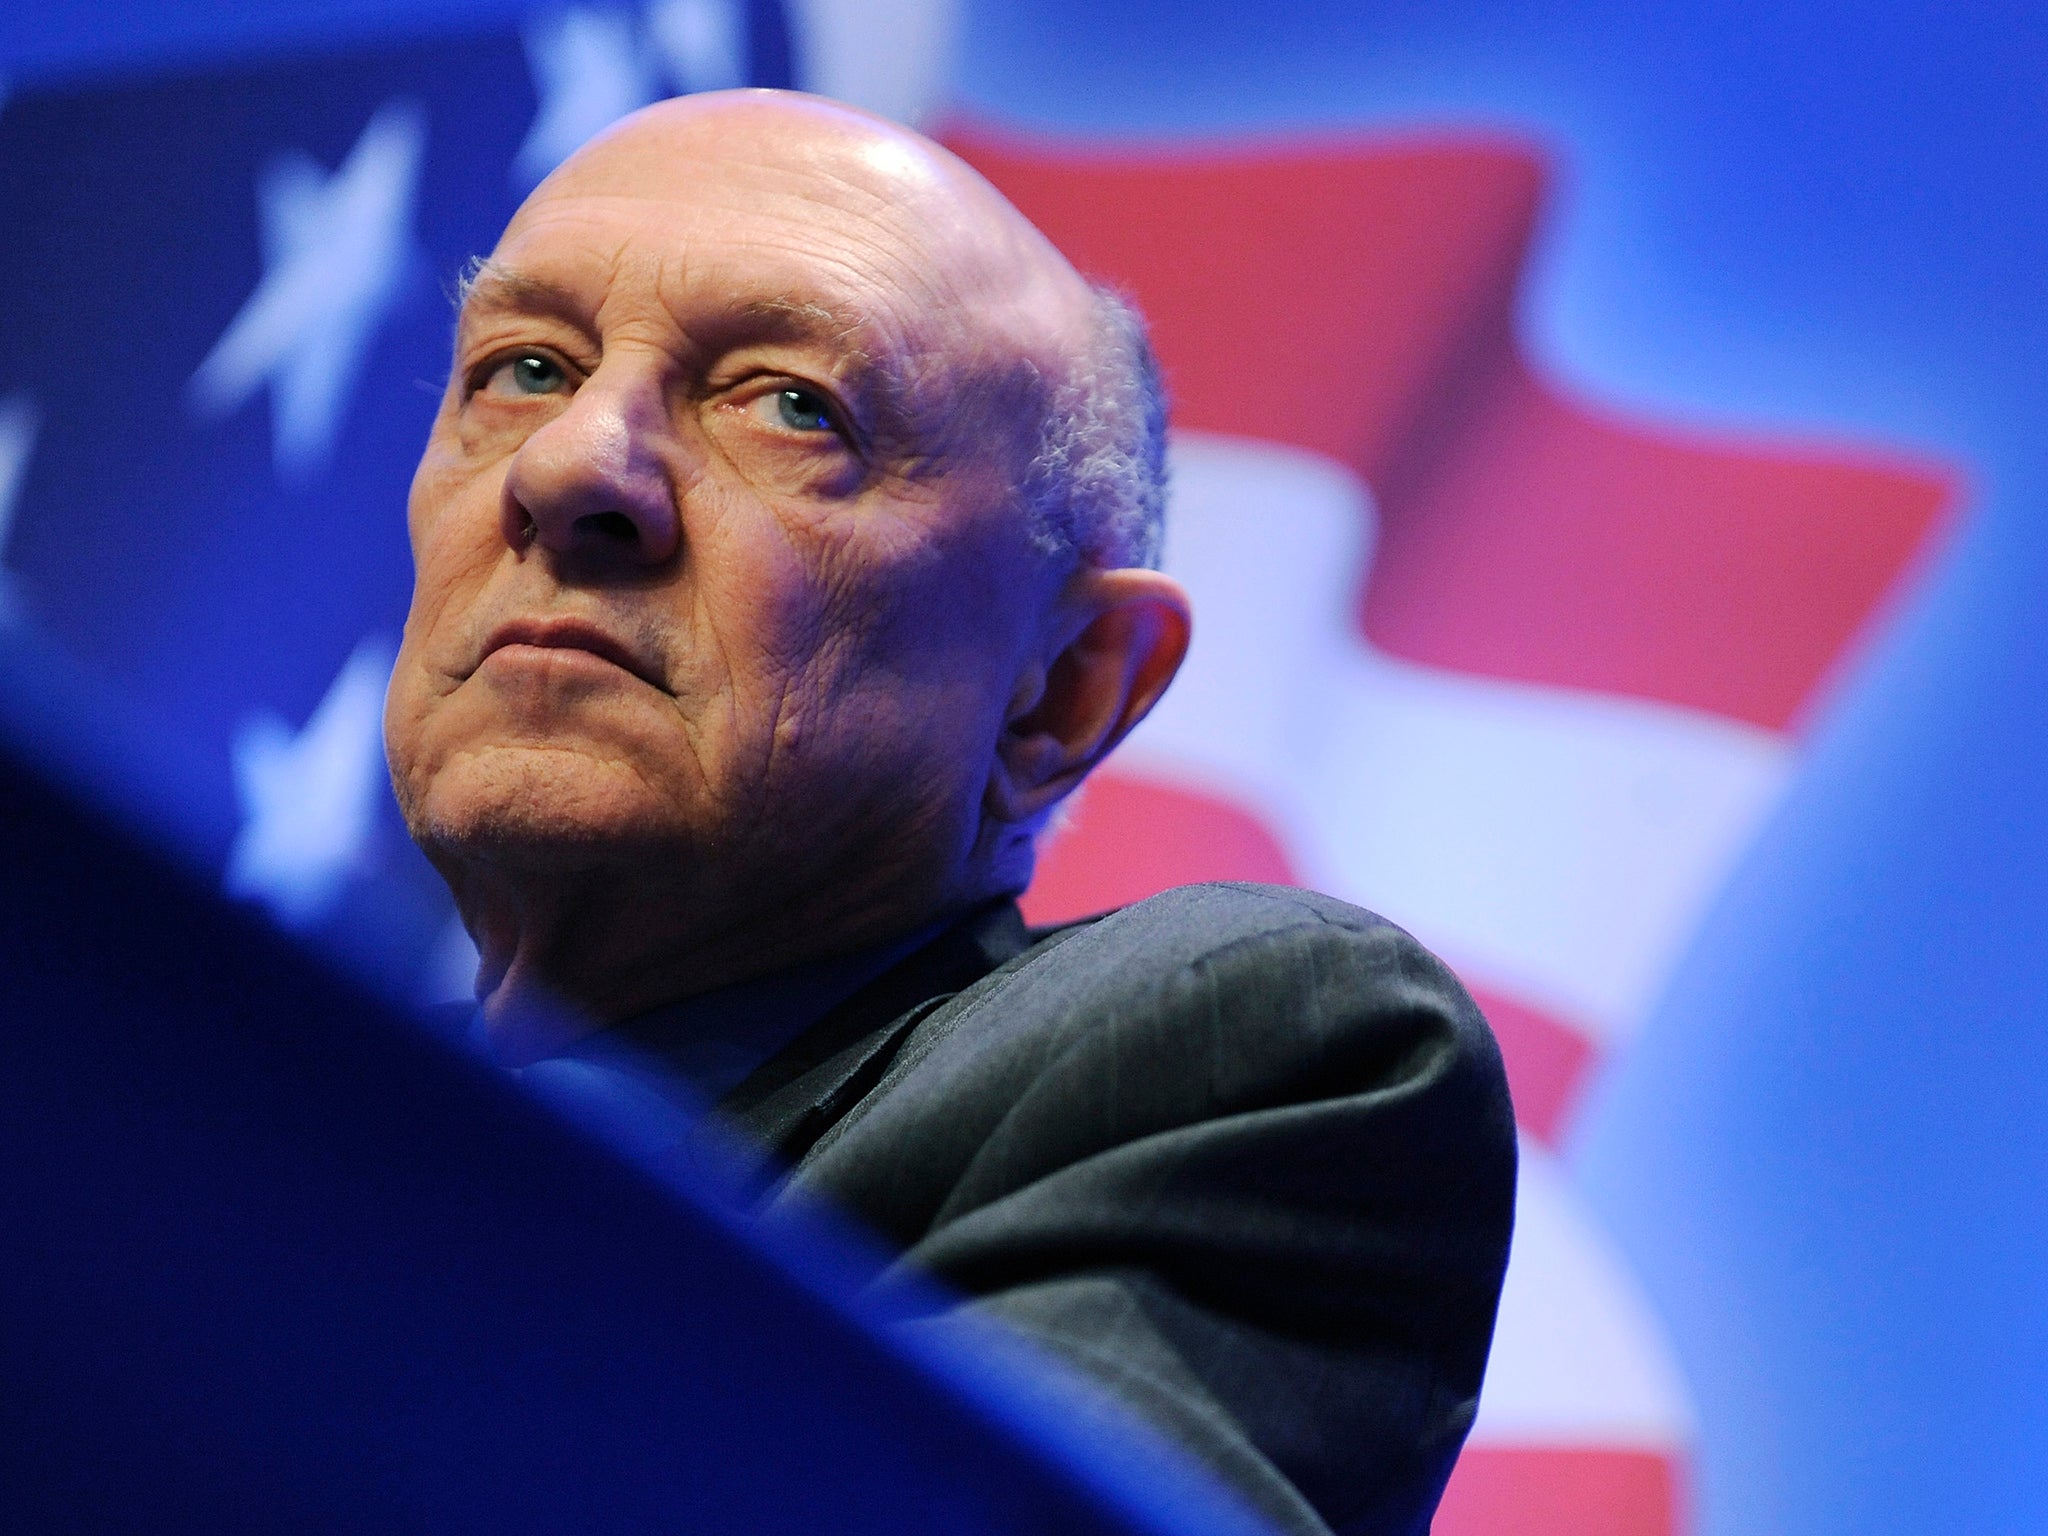 James Woolsey, former director of the US Central Intelligence Agency